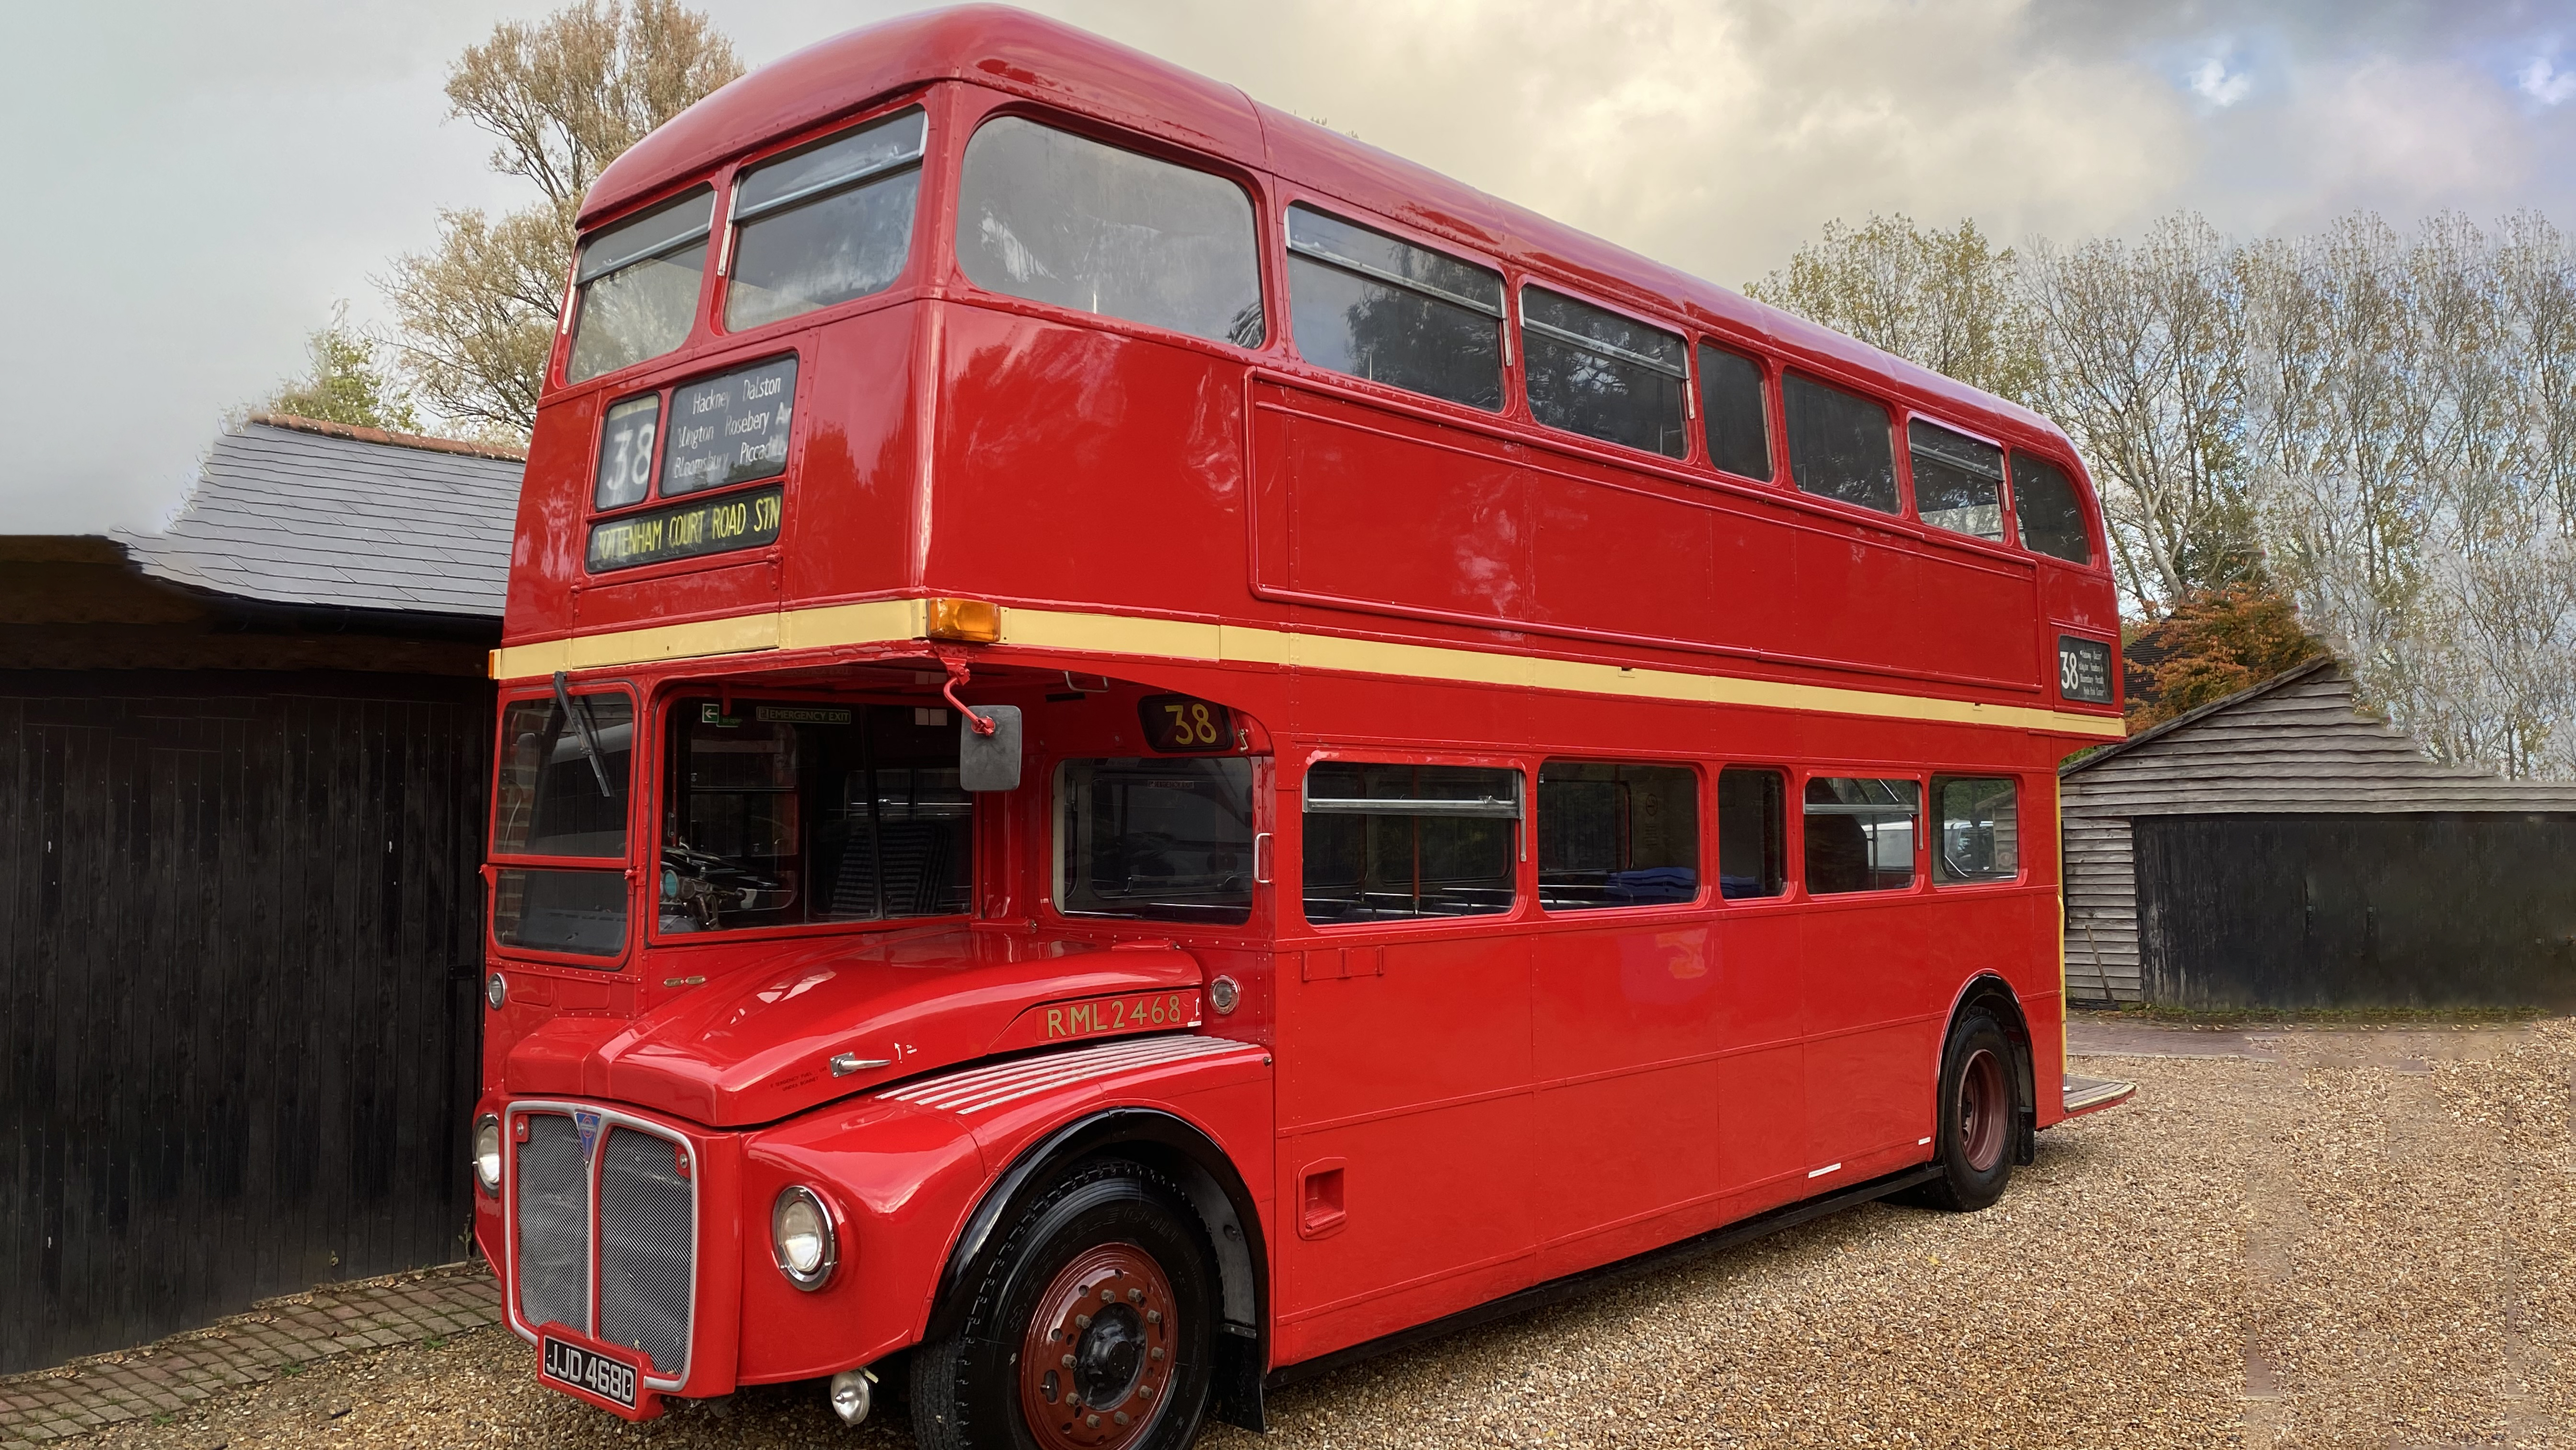 Routemaster London Bus wedding car for hire in Lewes, East Sussex